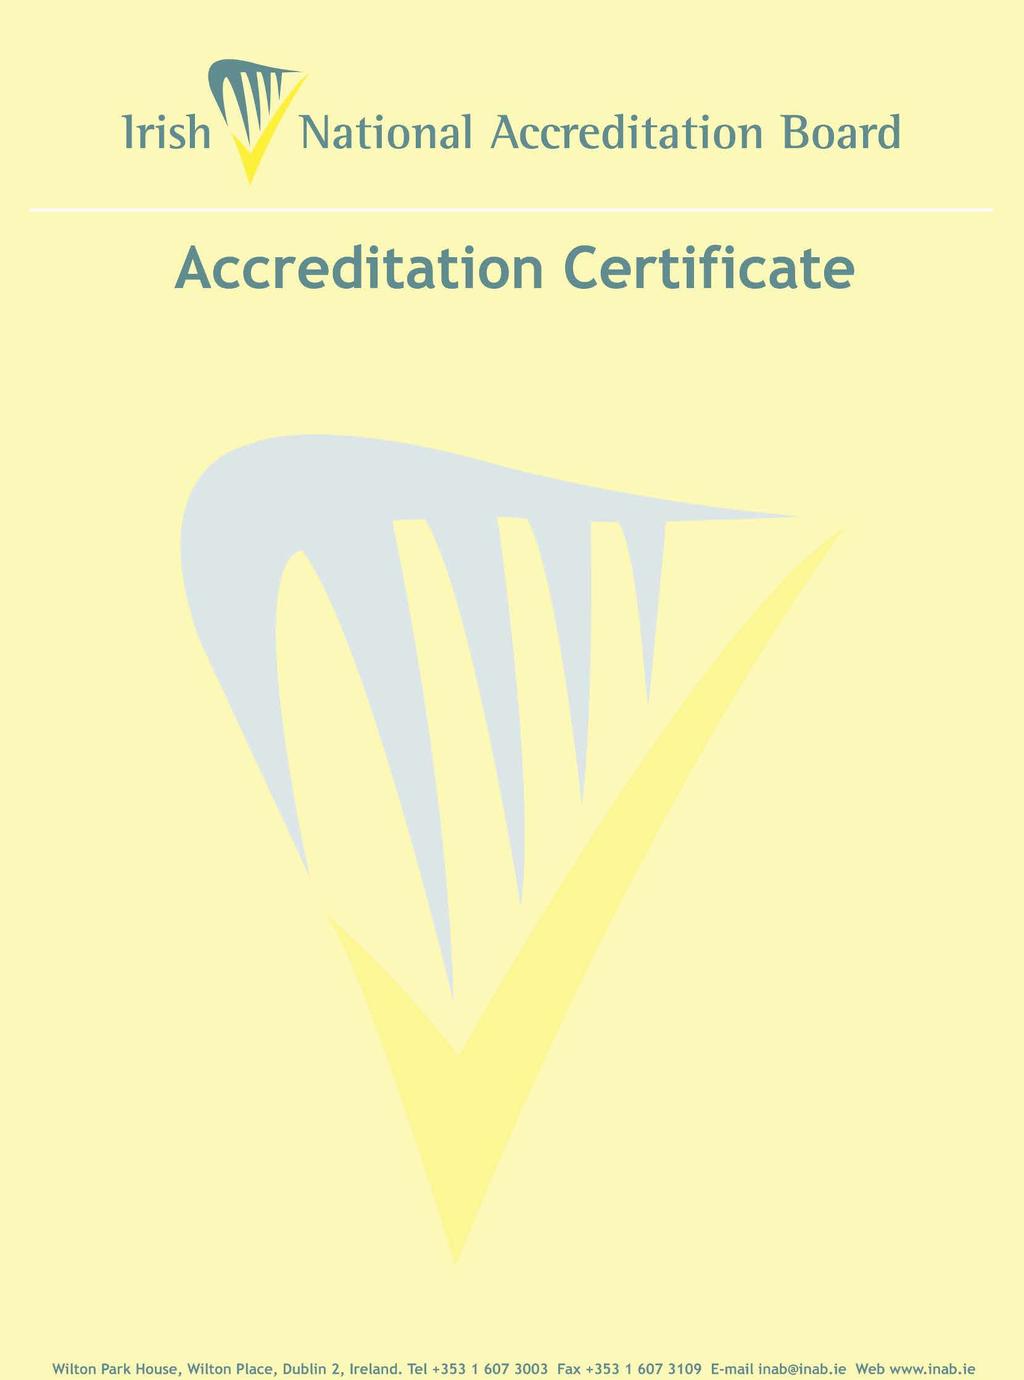 Drug Treatment Centre Board Trinity Court, 30-31 Pearse Street, Dublin 2 Testing Laboratory Registration number: 169T is accredited by the Irish National Accreditation Board (INAB) to undertake